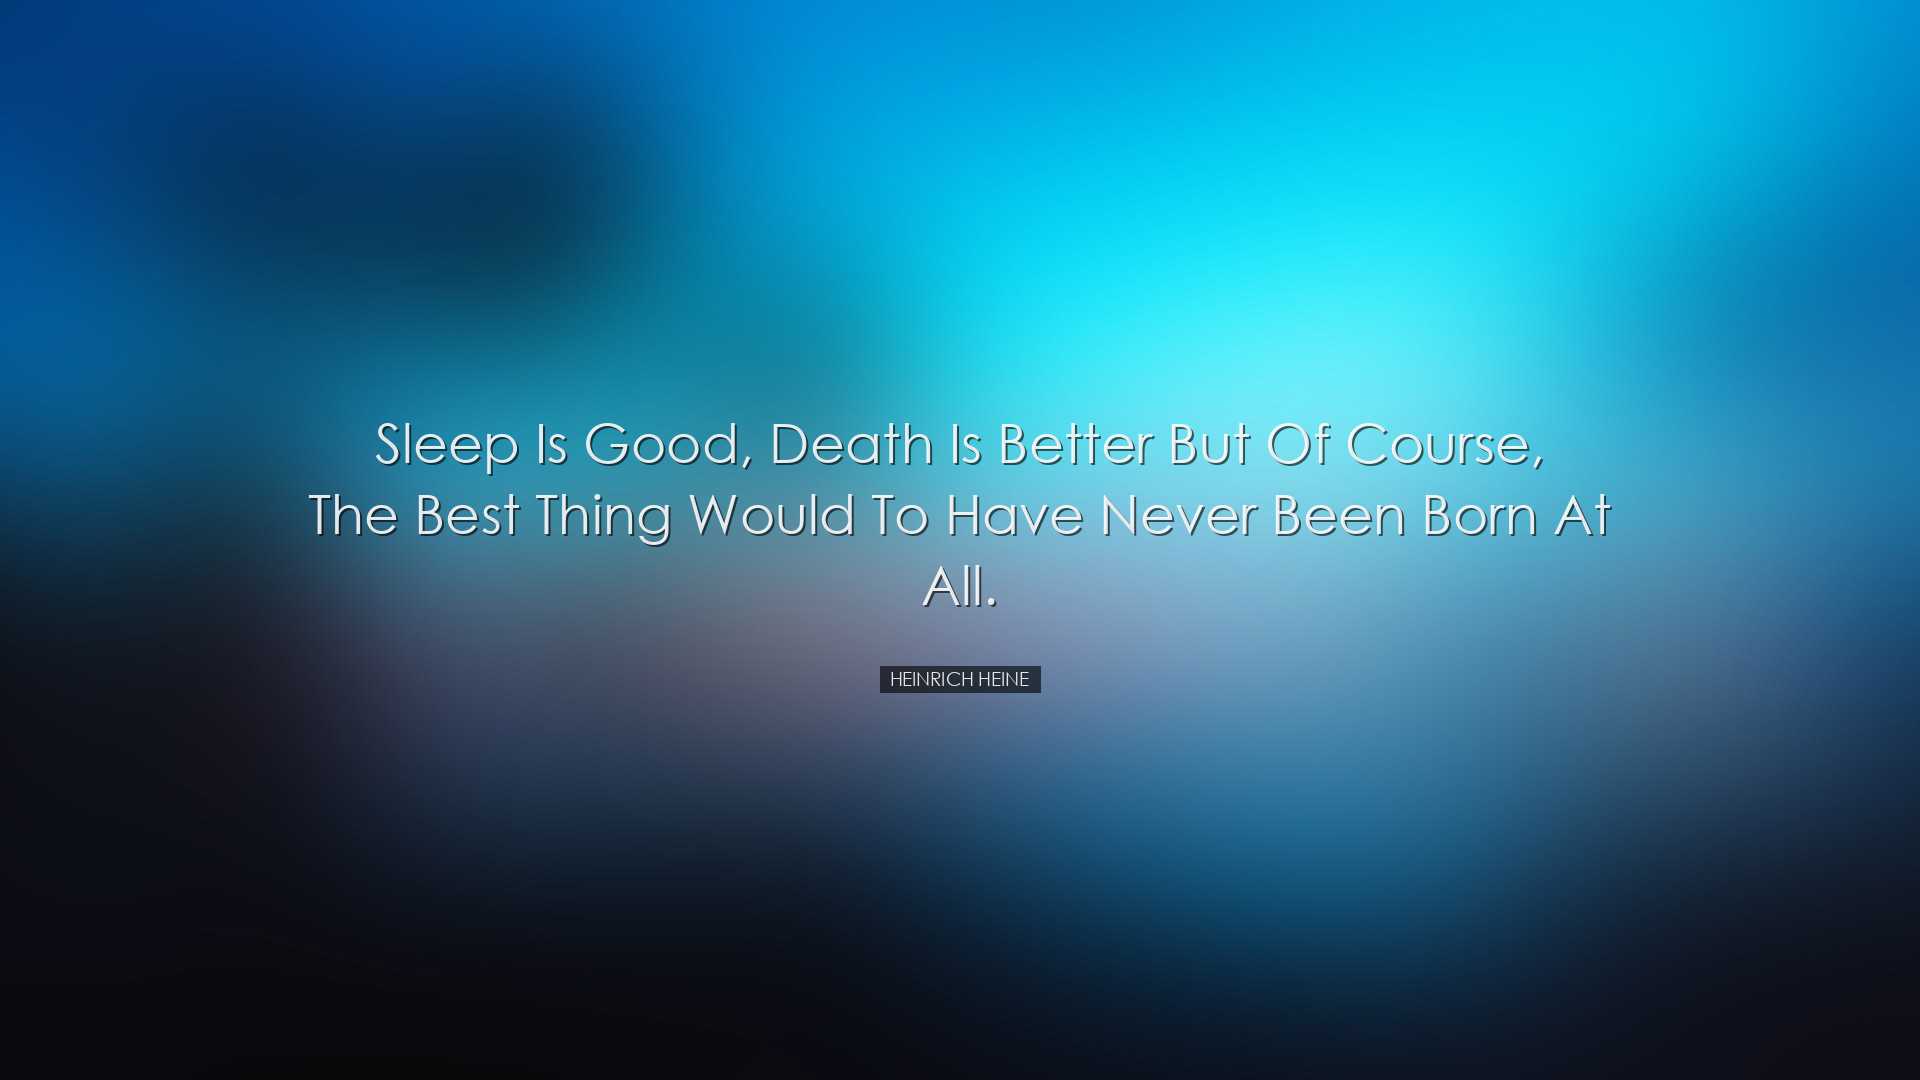 Sleep is good, death is better but of course, the best thing would